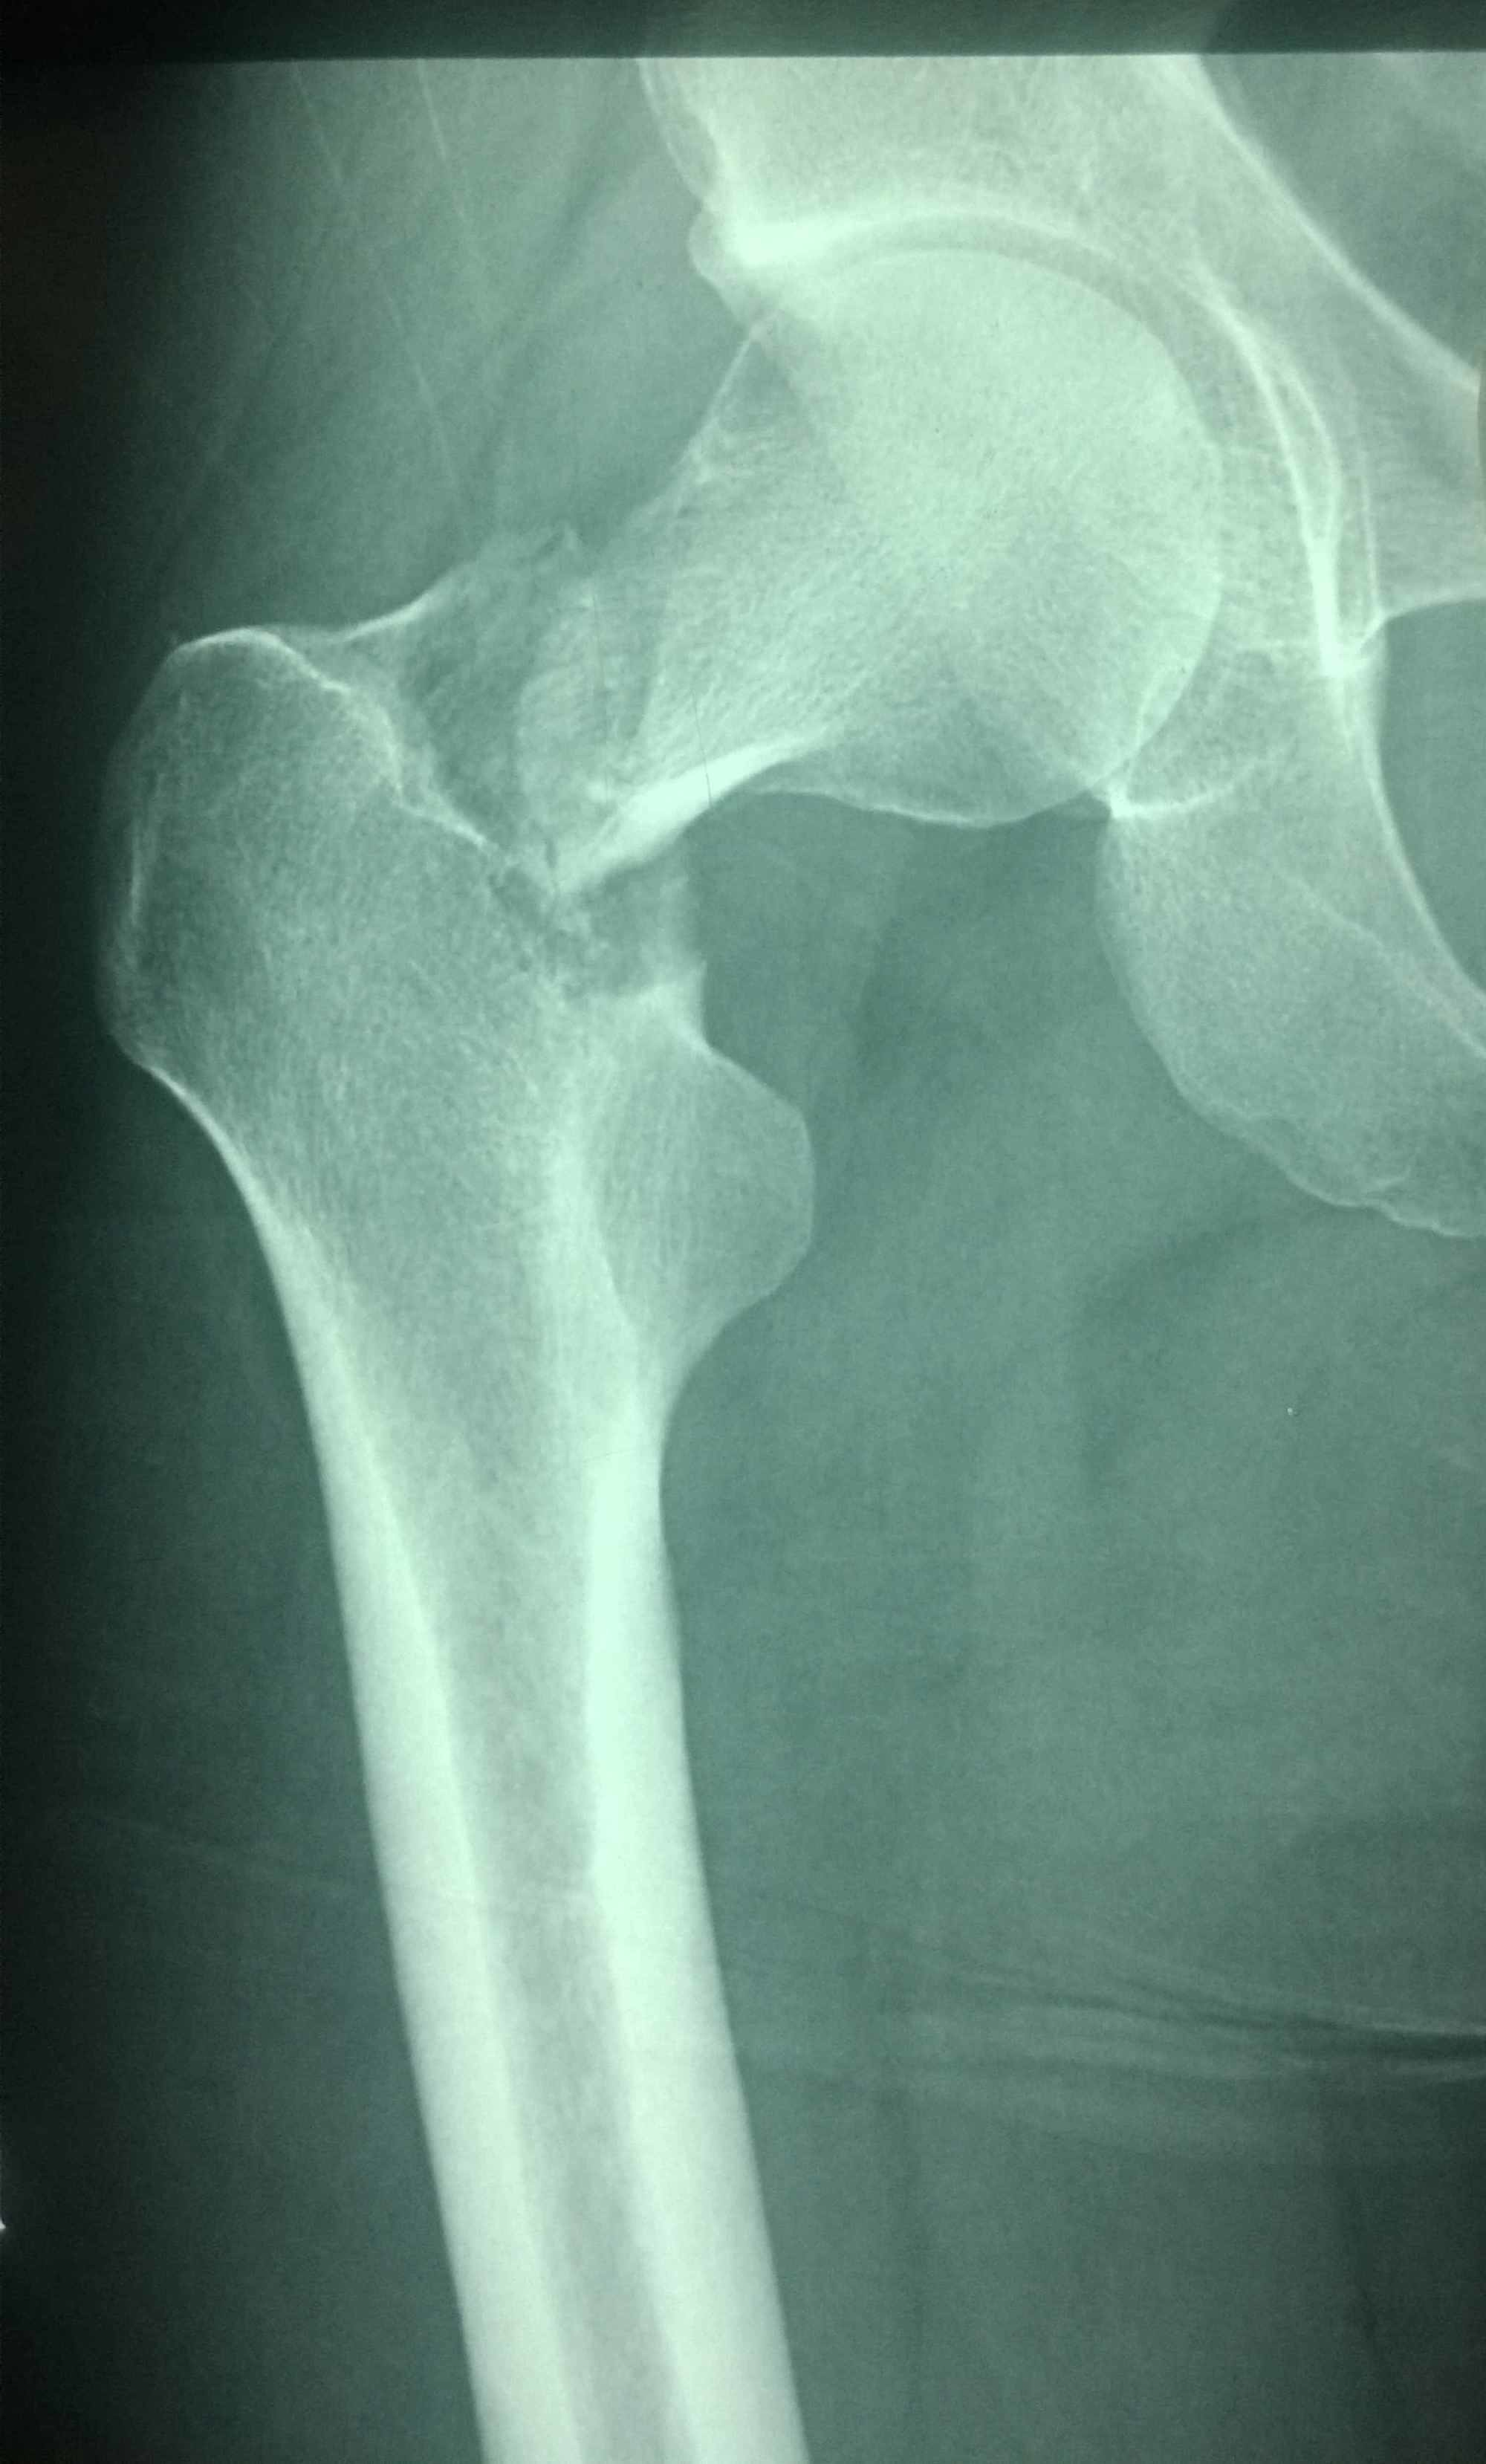 Femoral neck fracture x ray - foliowery